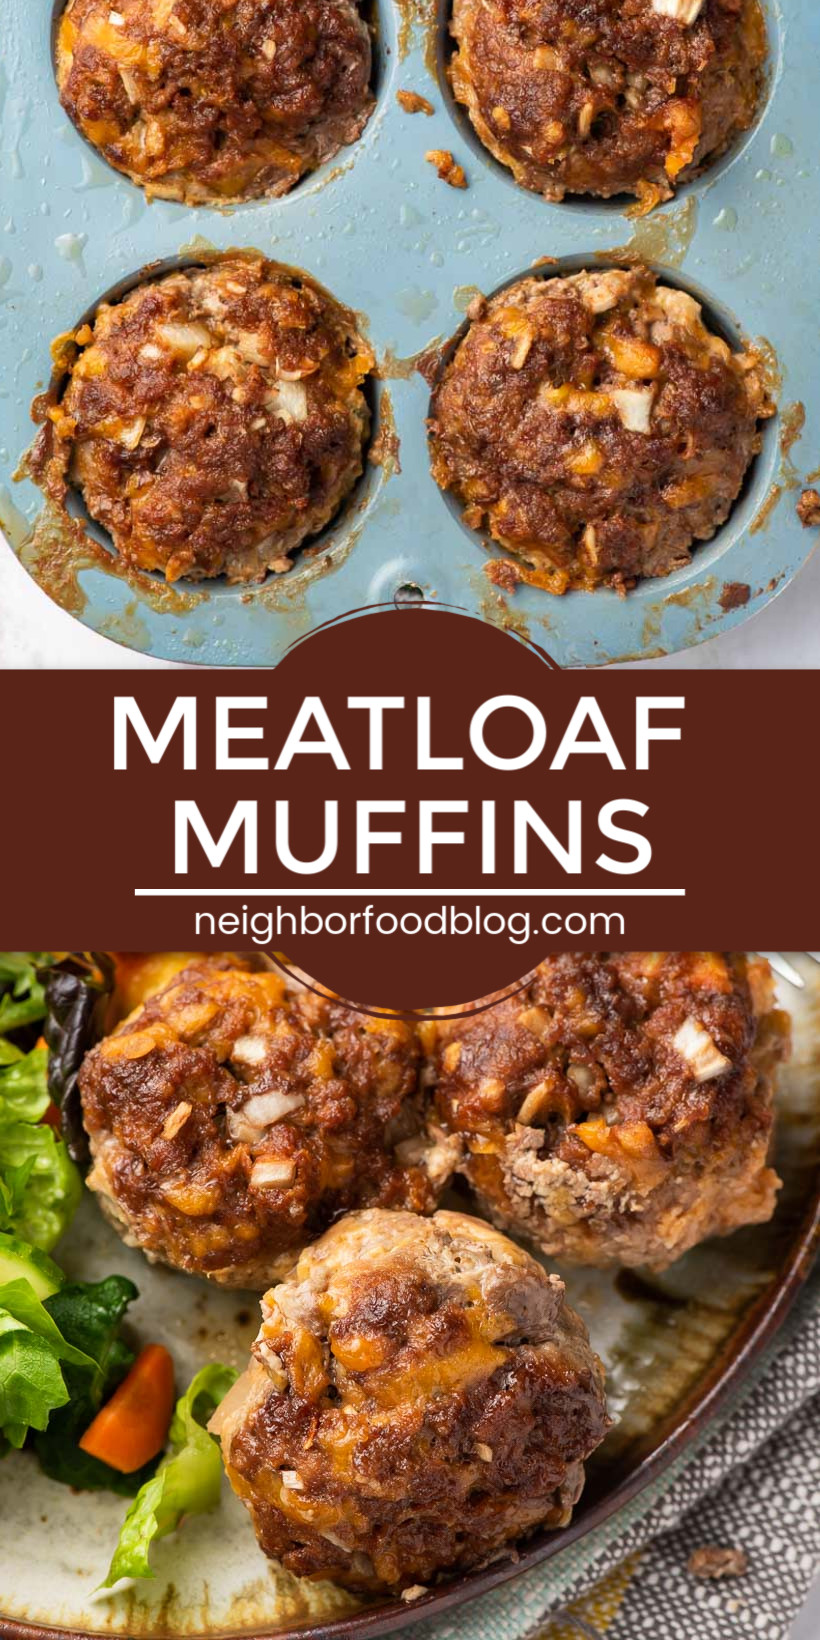 Kid Friendly Meatloaf
 Cheesy Mini Meatloaf is a great kid friendly dinner option